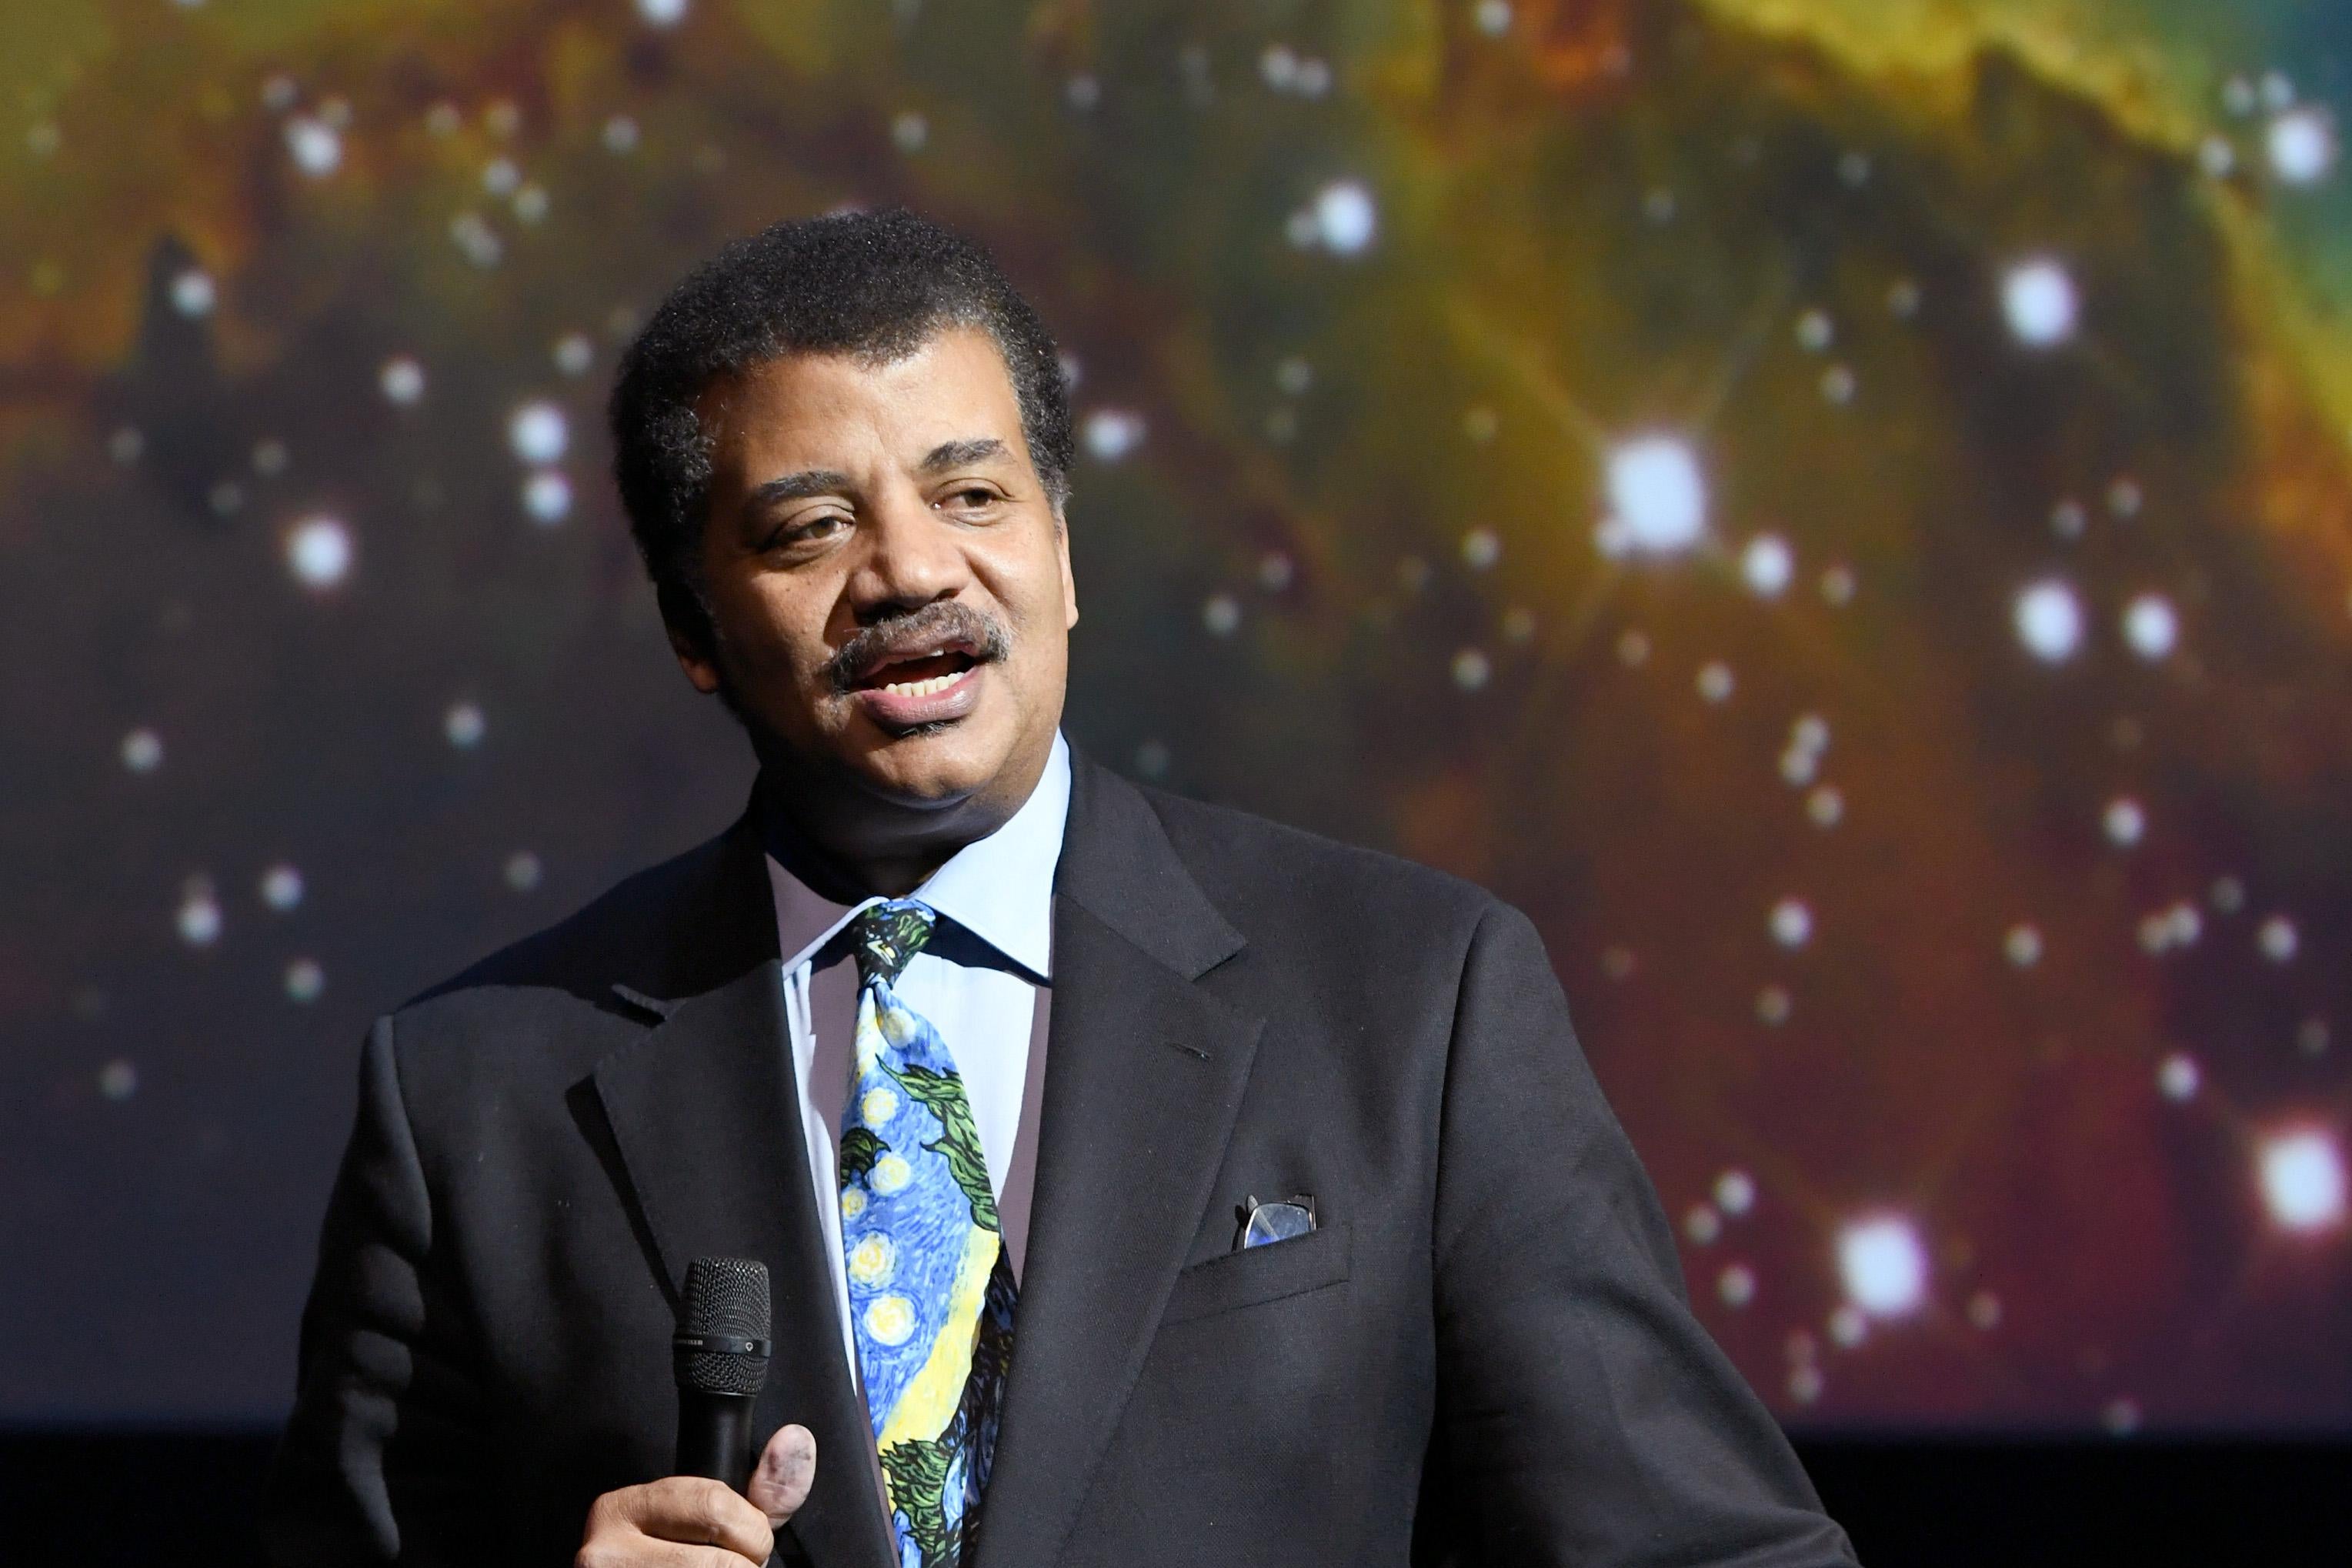 Neil deGrasse Tyson with an image of stars behind him.